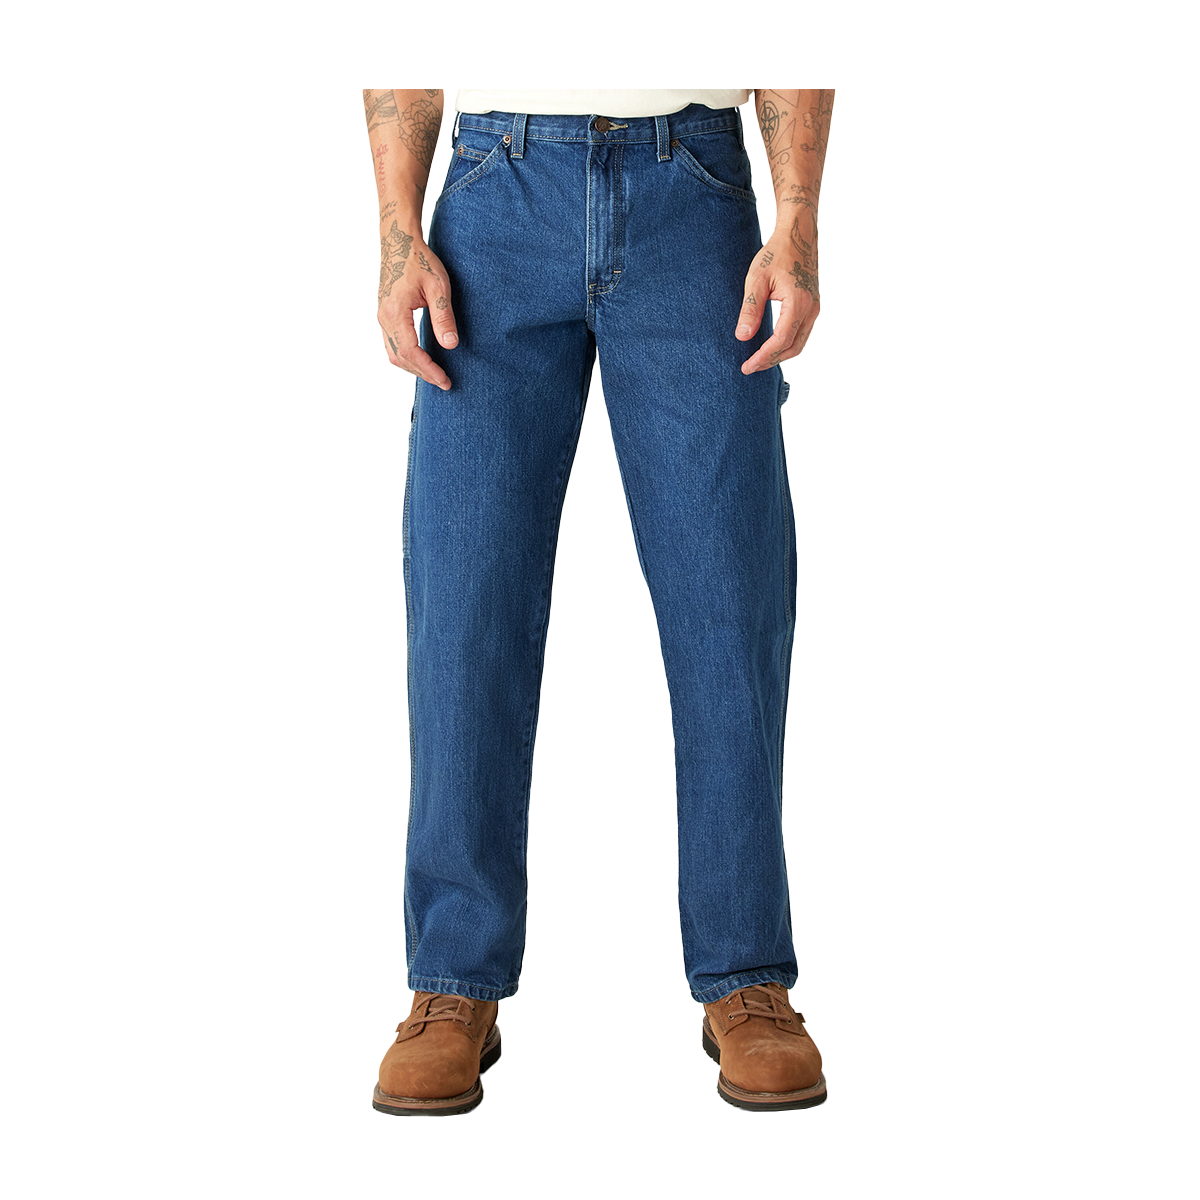 Dickies Relaxed Fit Heavyweight Carpenter Jeans - Stonewashed Indigo Blue